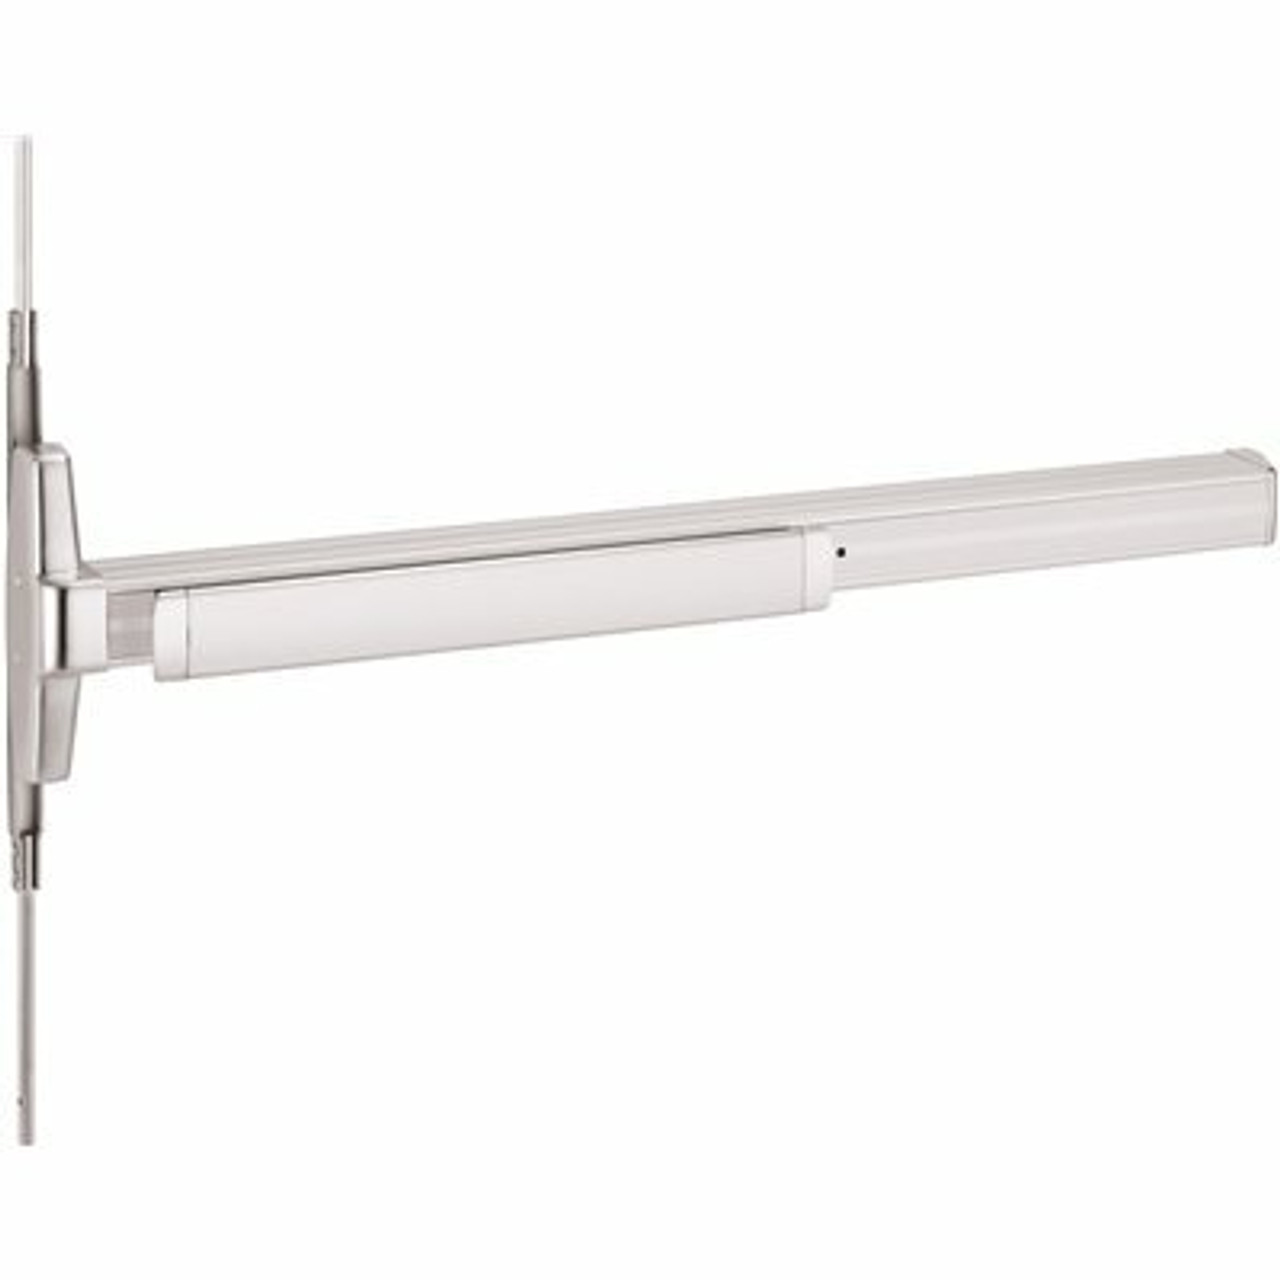 Von Duprin Grade-1 Satin Chrome Concealed Vertical Rod Exit Device, Non-Handed, Exit Only - 310013236